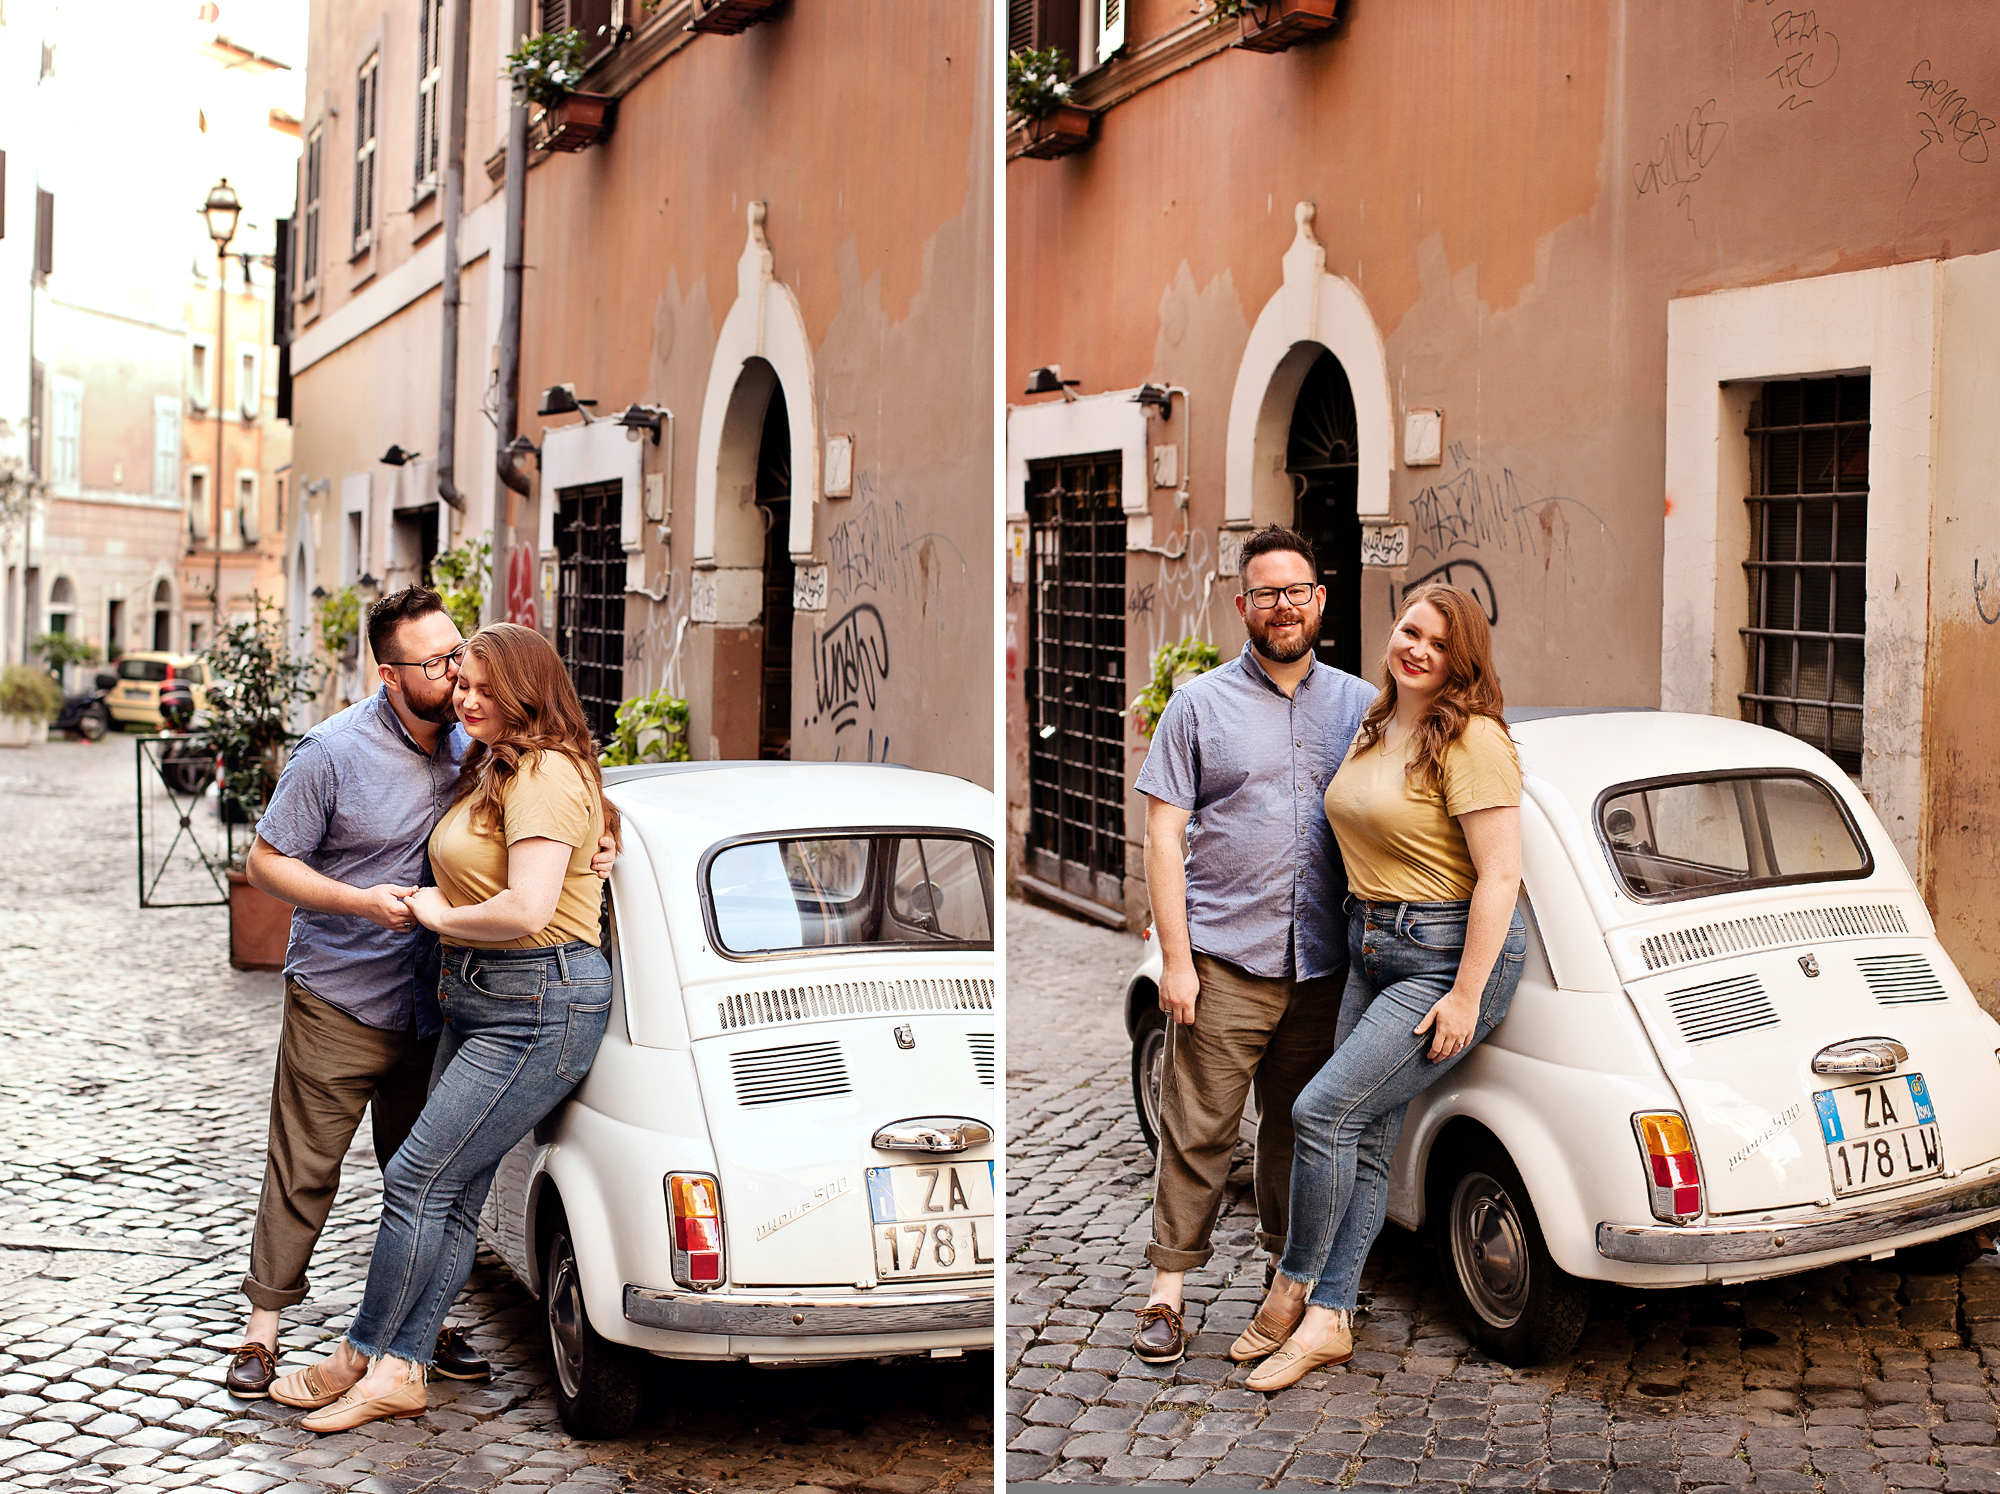 Honeymoon, vacation, family, engagement, maternity, wedding, love story individual and solo photoshoots in Rome, Italy by photographer Tricia Anne Photography | Rome Photographer, vacation, Rome Photo Shoot, Trastevere photo shoot in rome, Rome Vacation Photographer, English speaking photographer in Rome